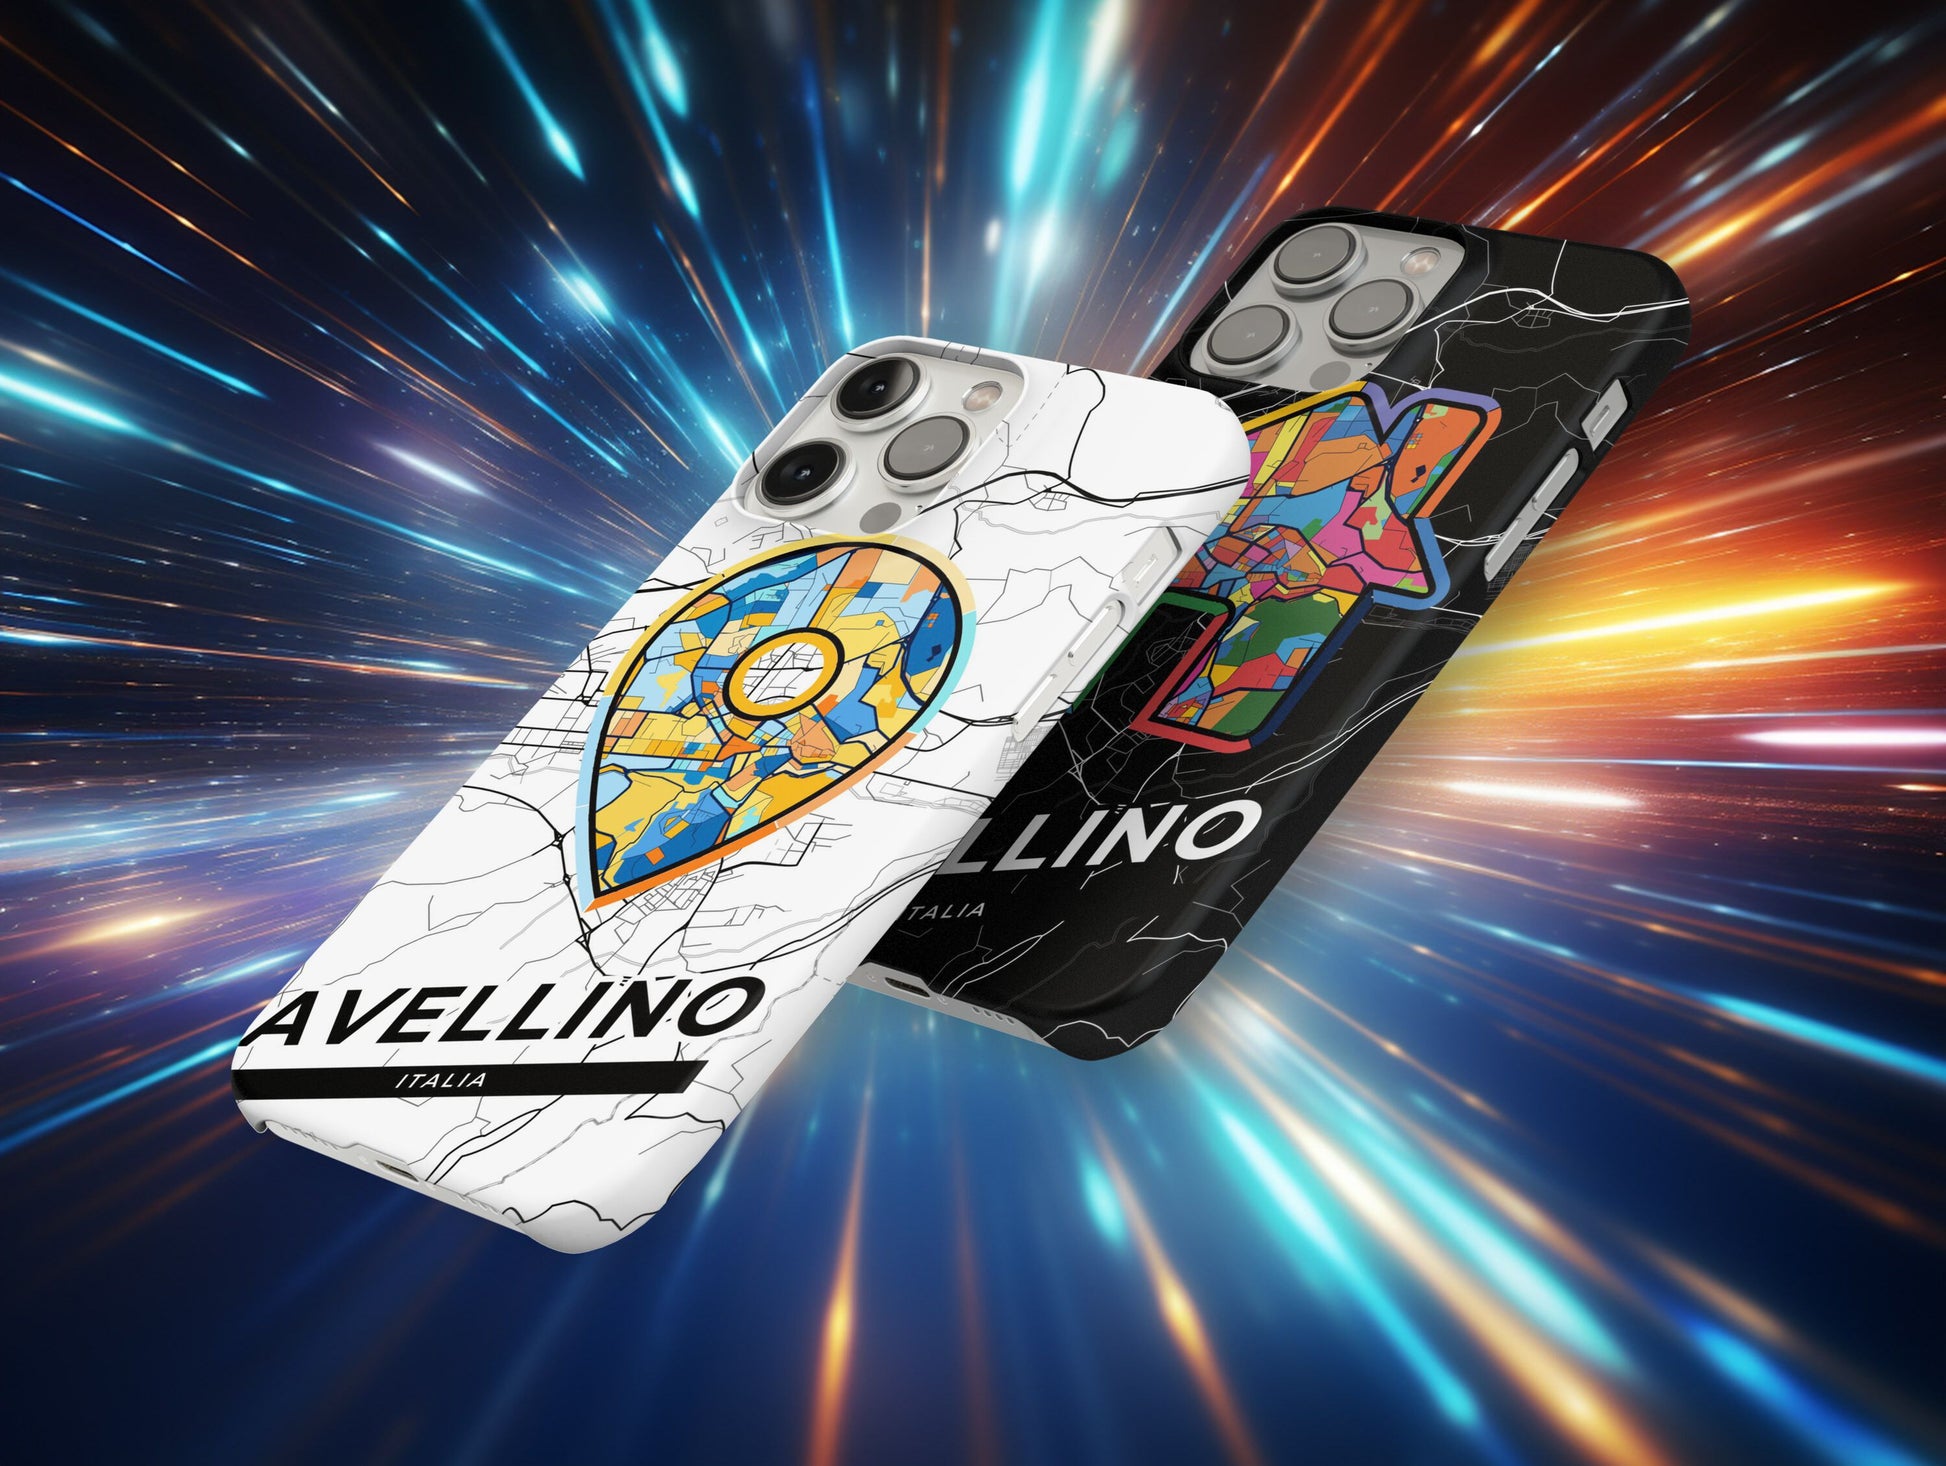 Avellino Italy slim phone case with colorful icon. Birthday, wedding or housewarming gift. Couple match cases.